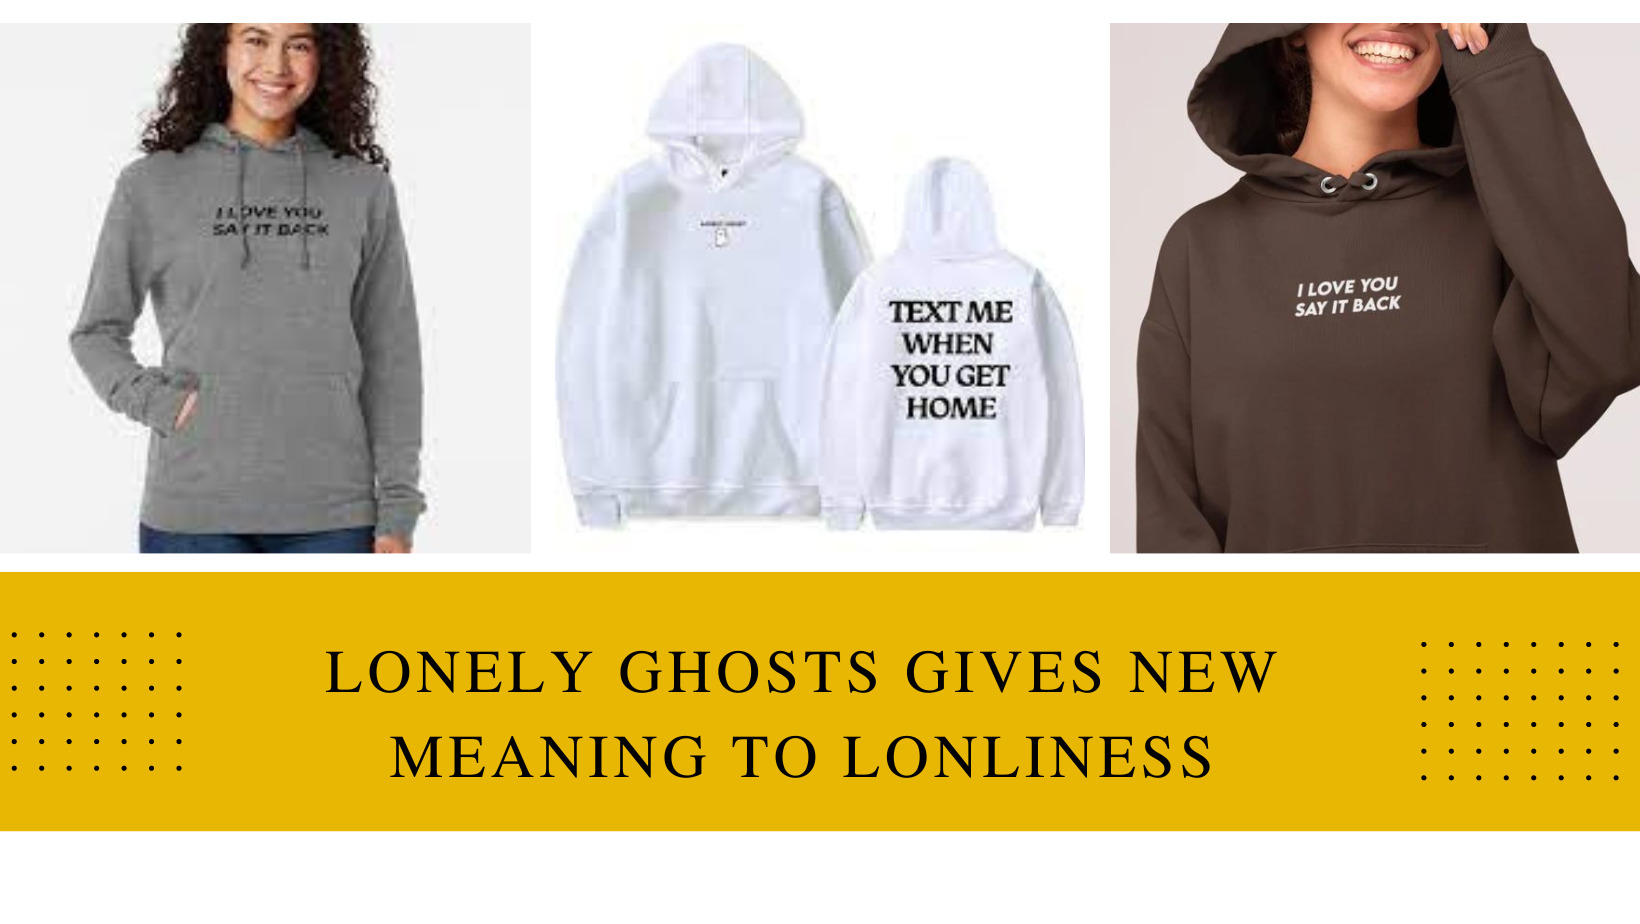 Lonely Ghost Gives New Meaning to Loneliness